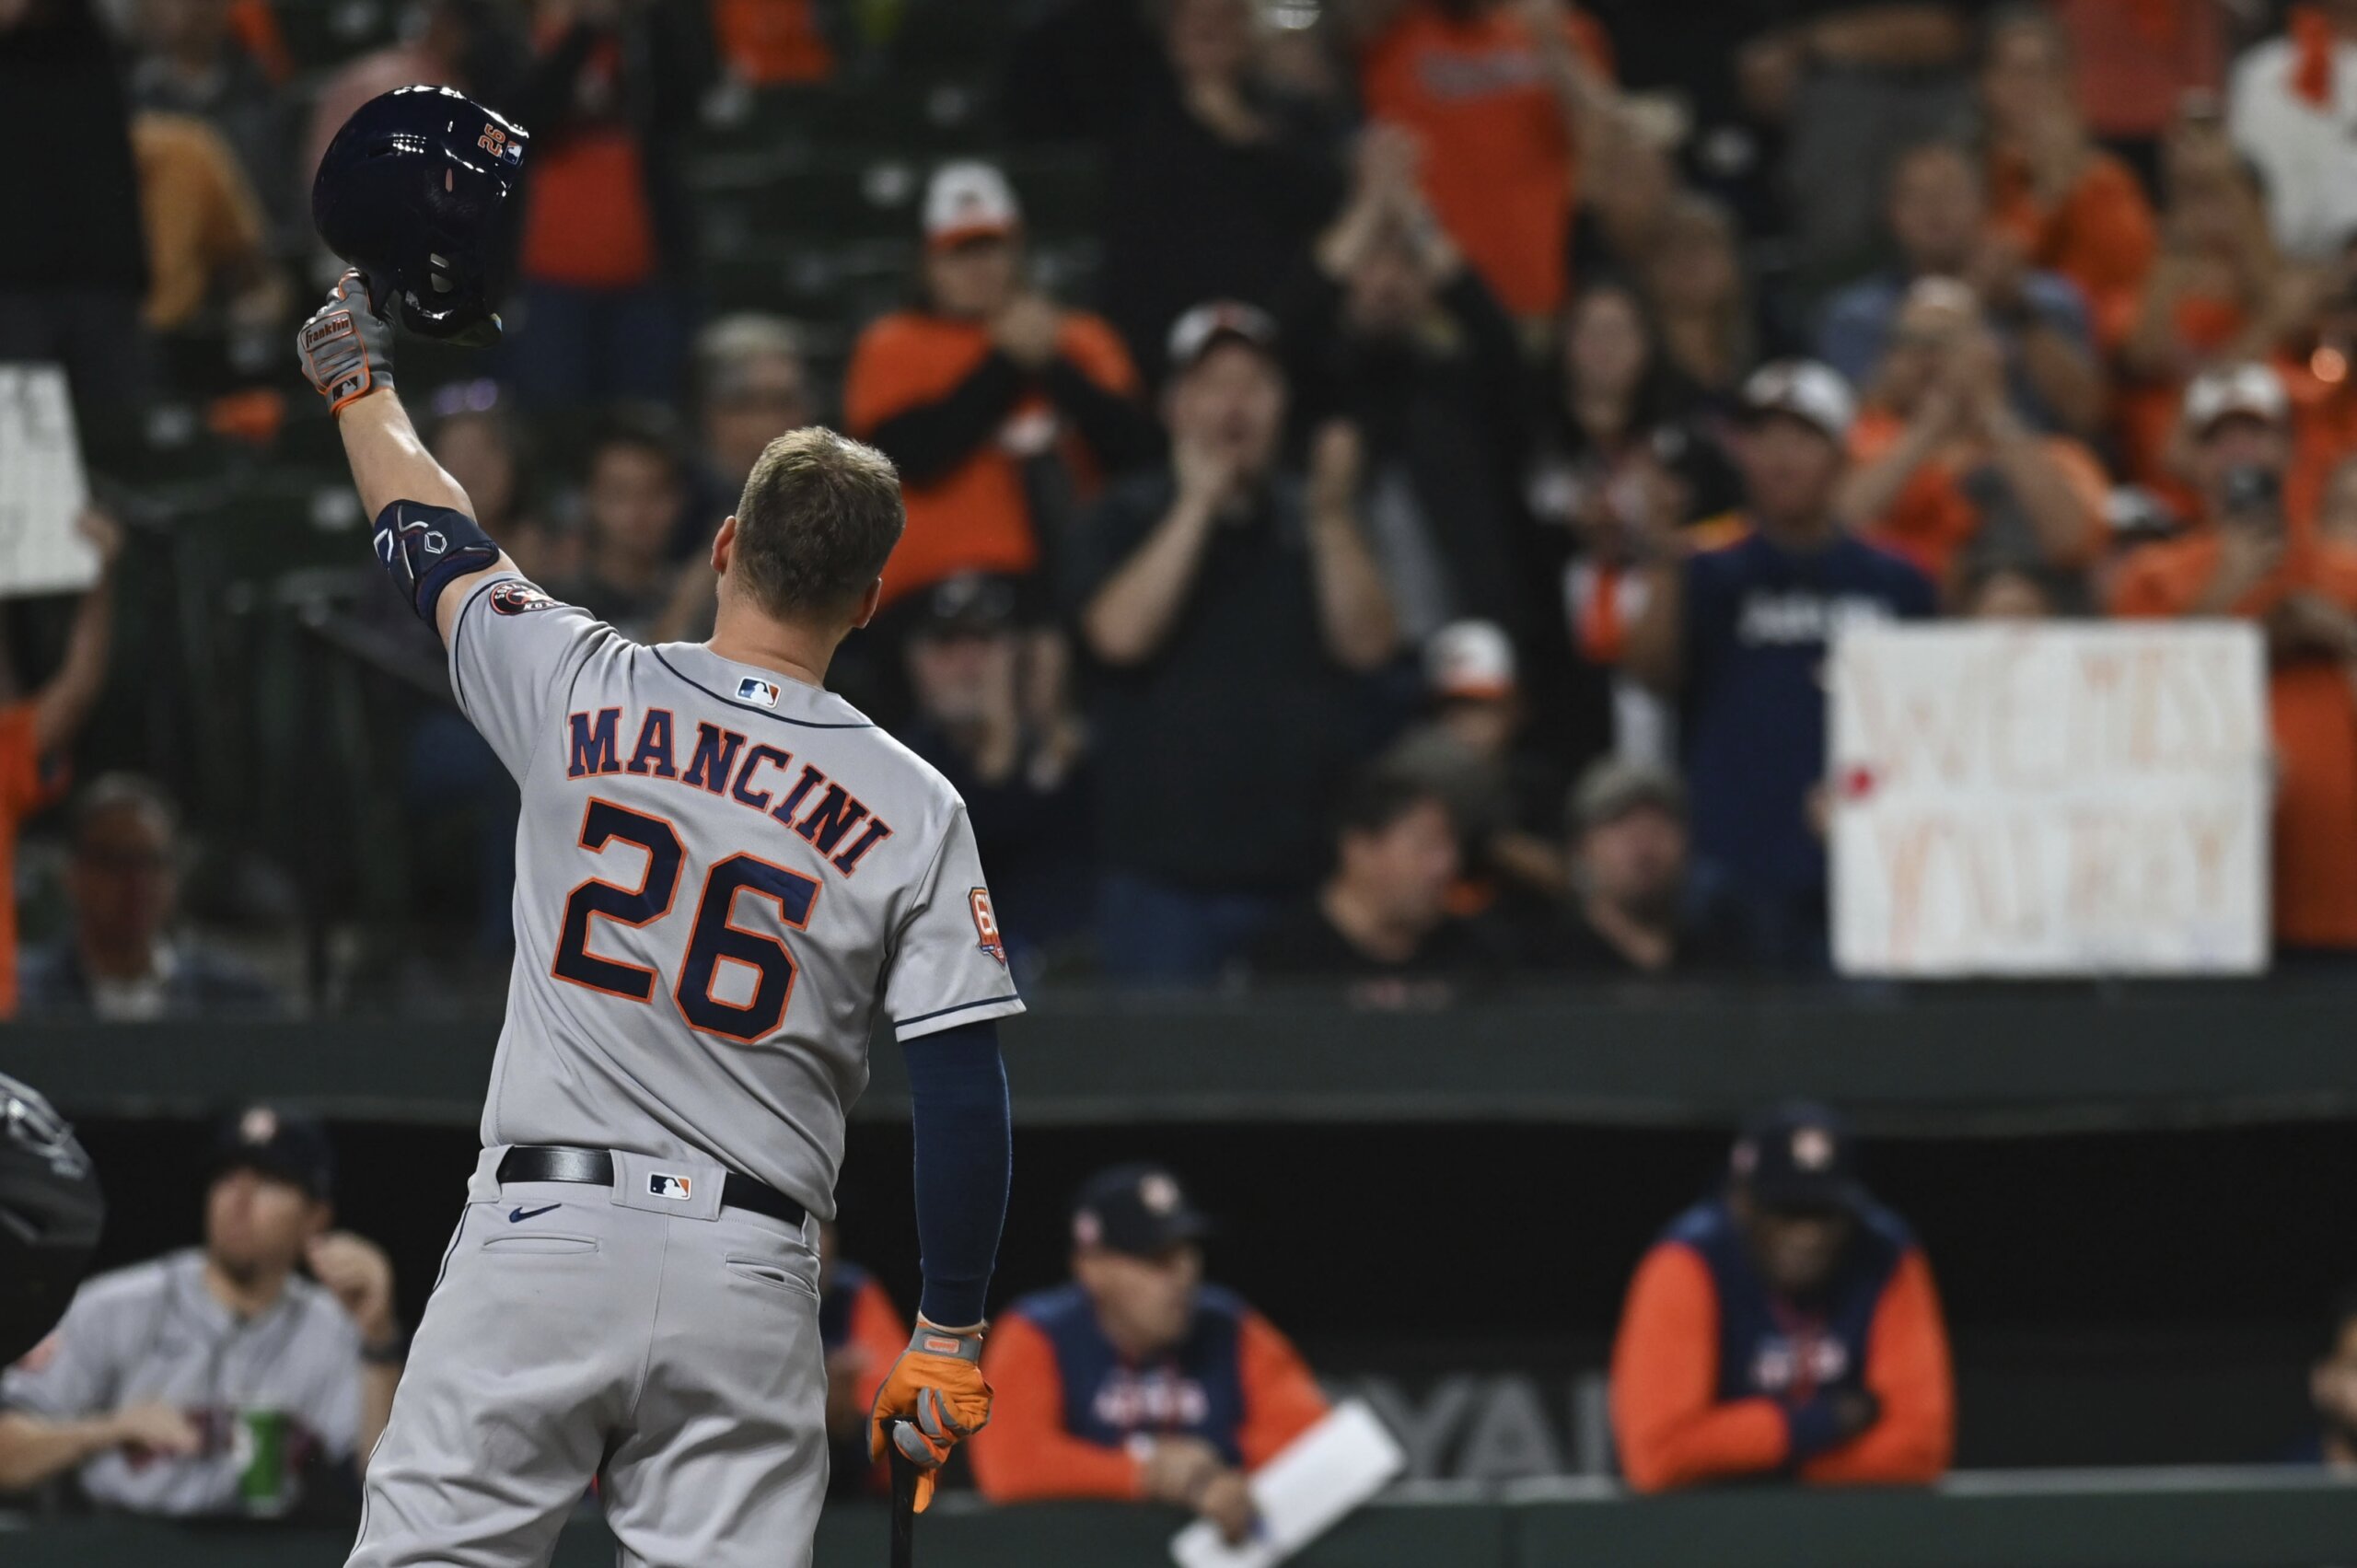 Learn more about Trey Mancini, who the Astros traded for Monday